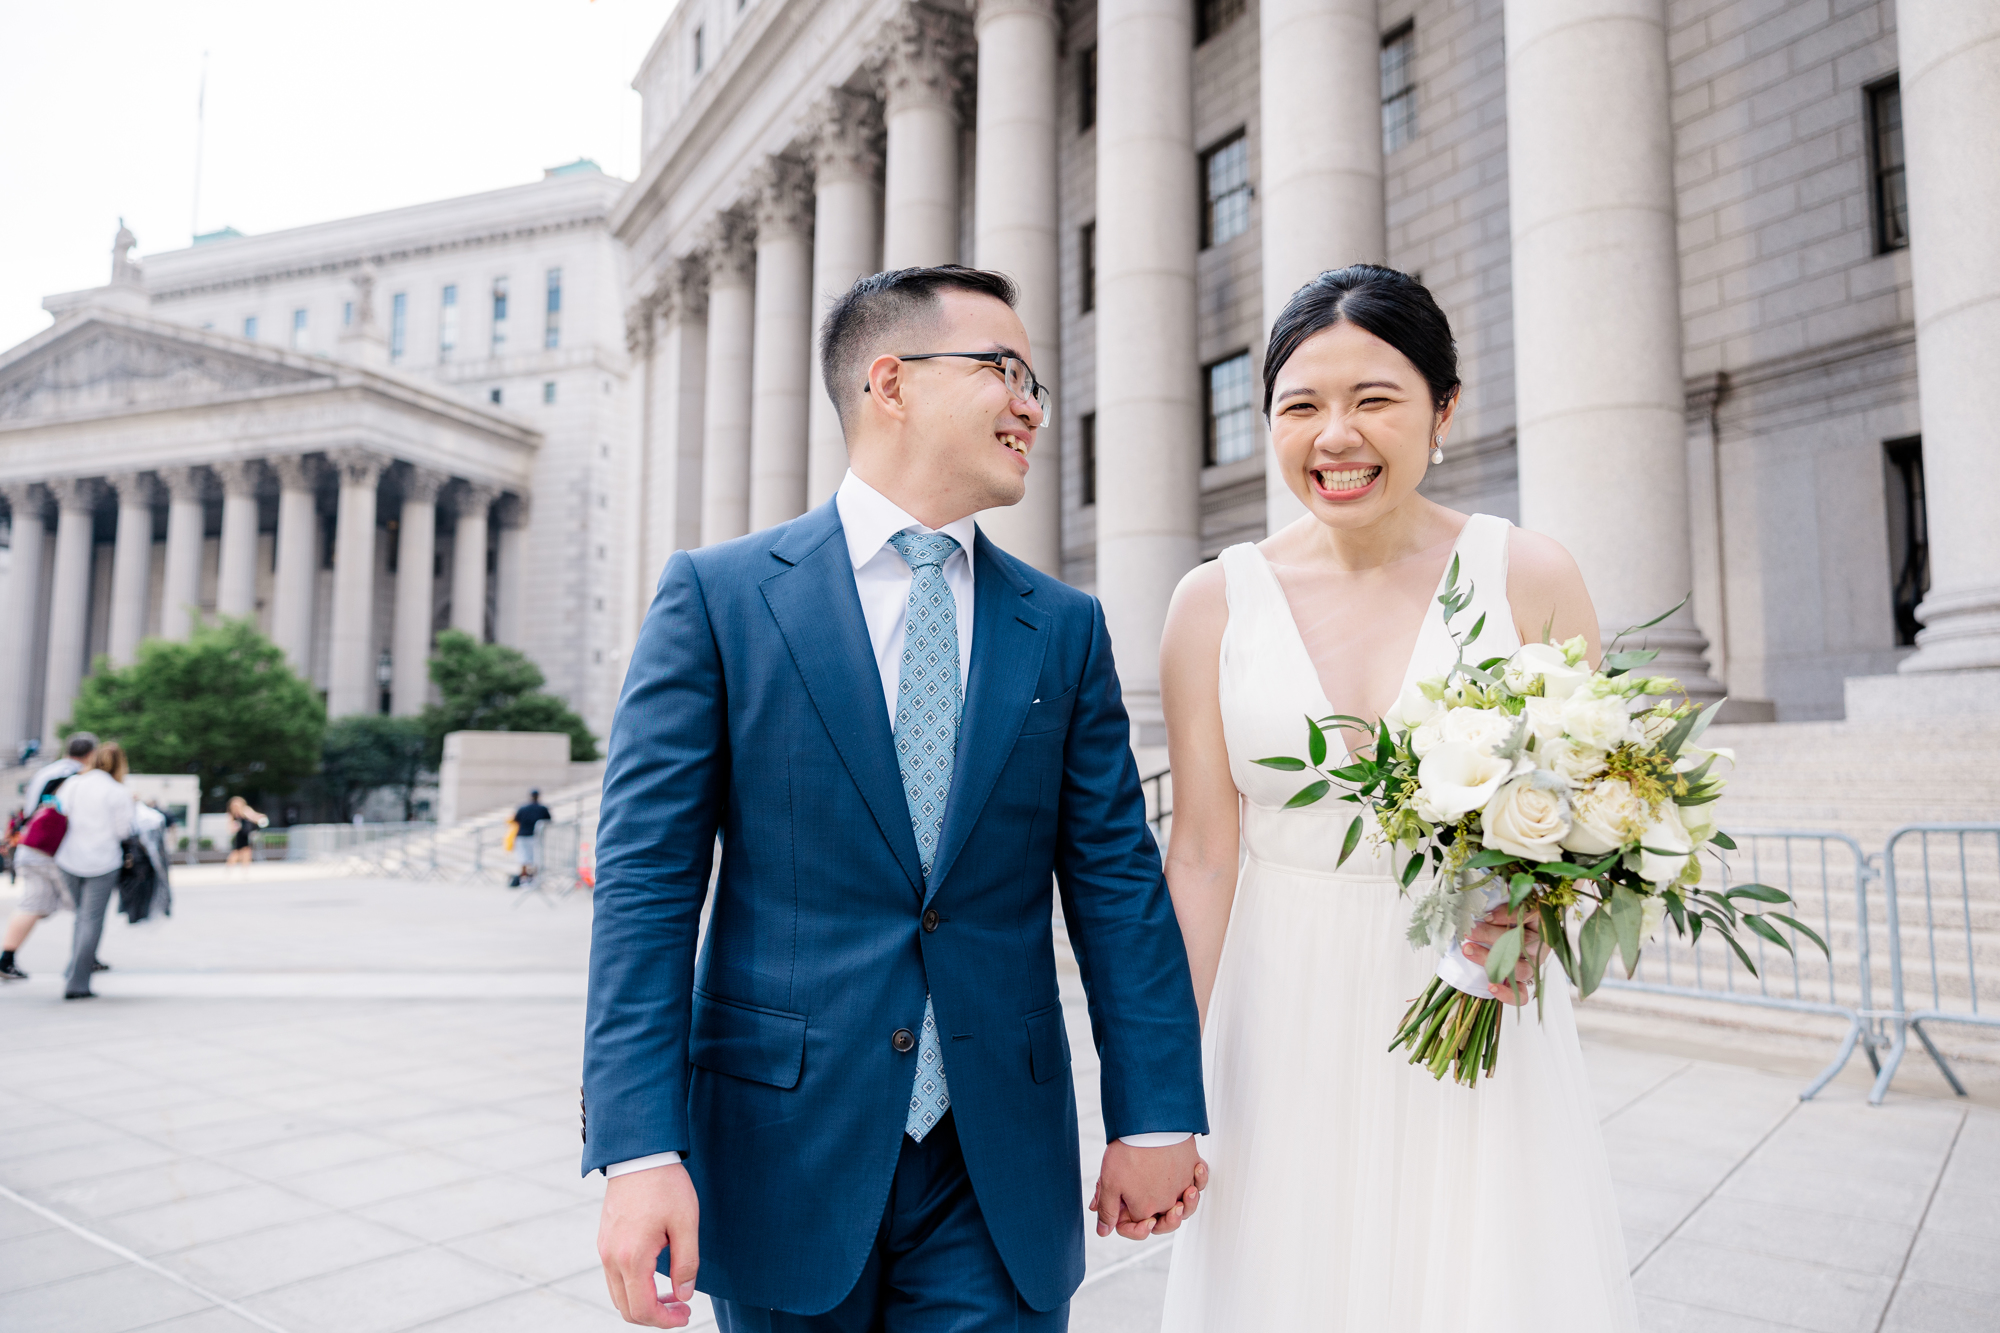 The Cost of New York Photographers for an Incredible Elopement